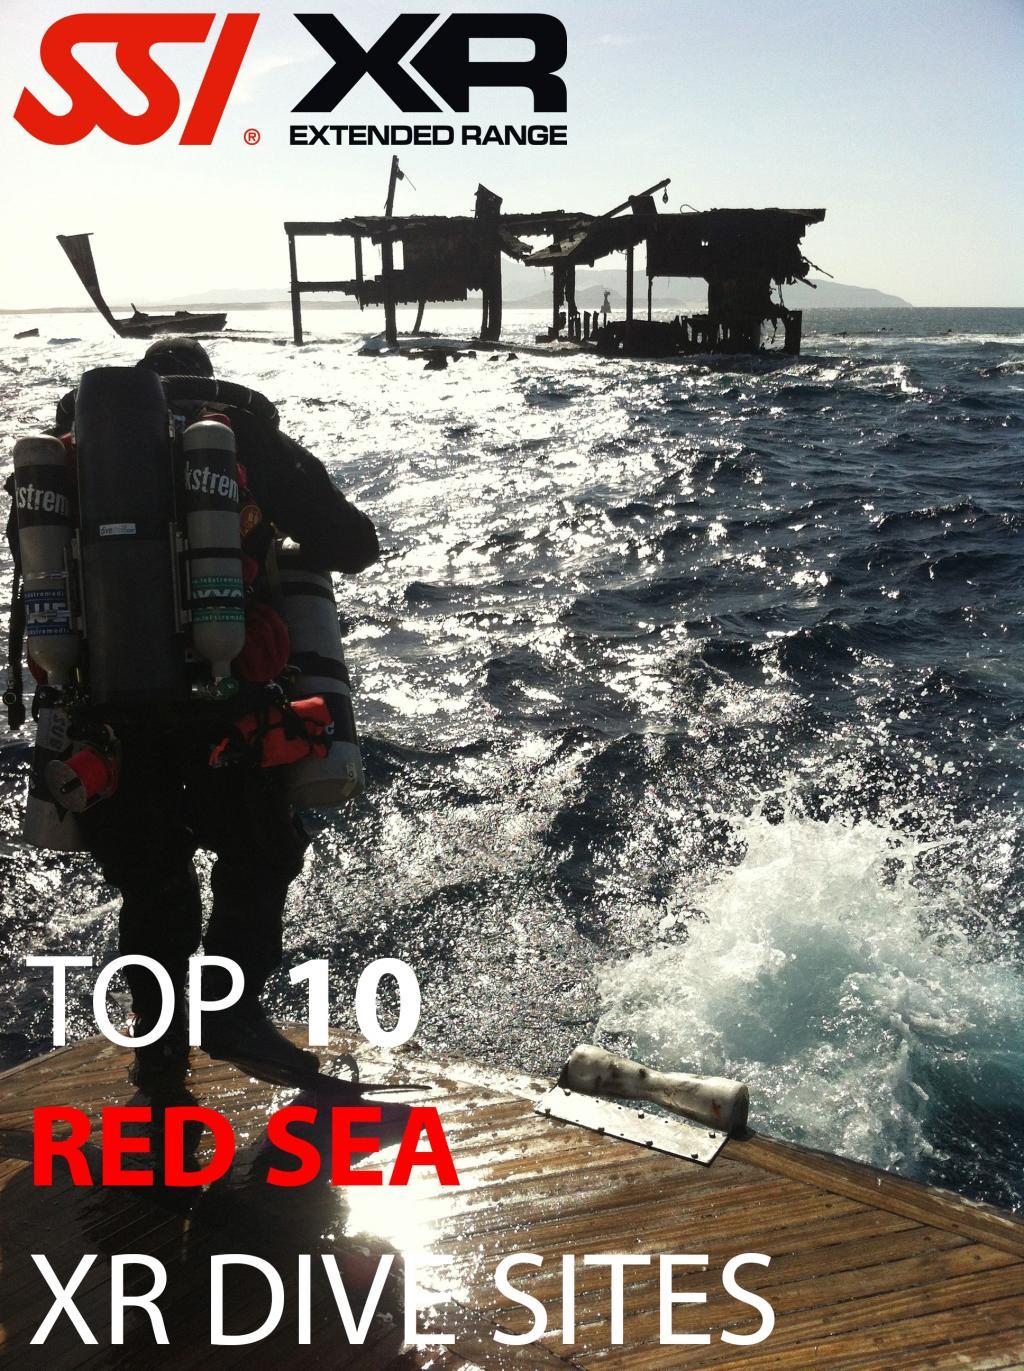 SSI XR (c) Top 10 XR Dive Sites of the Red Sea